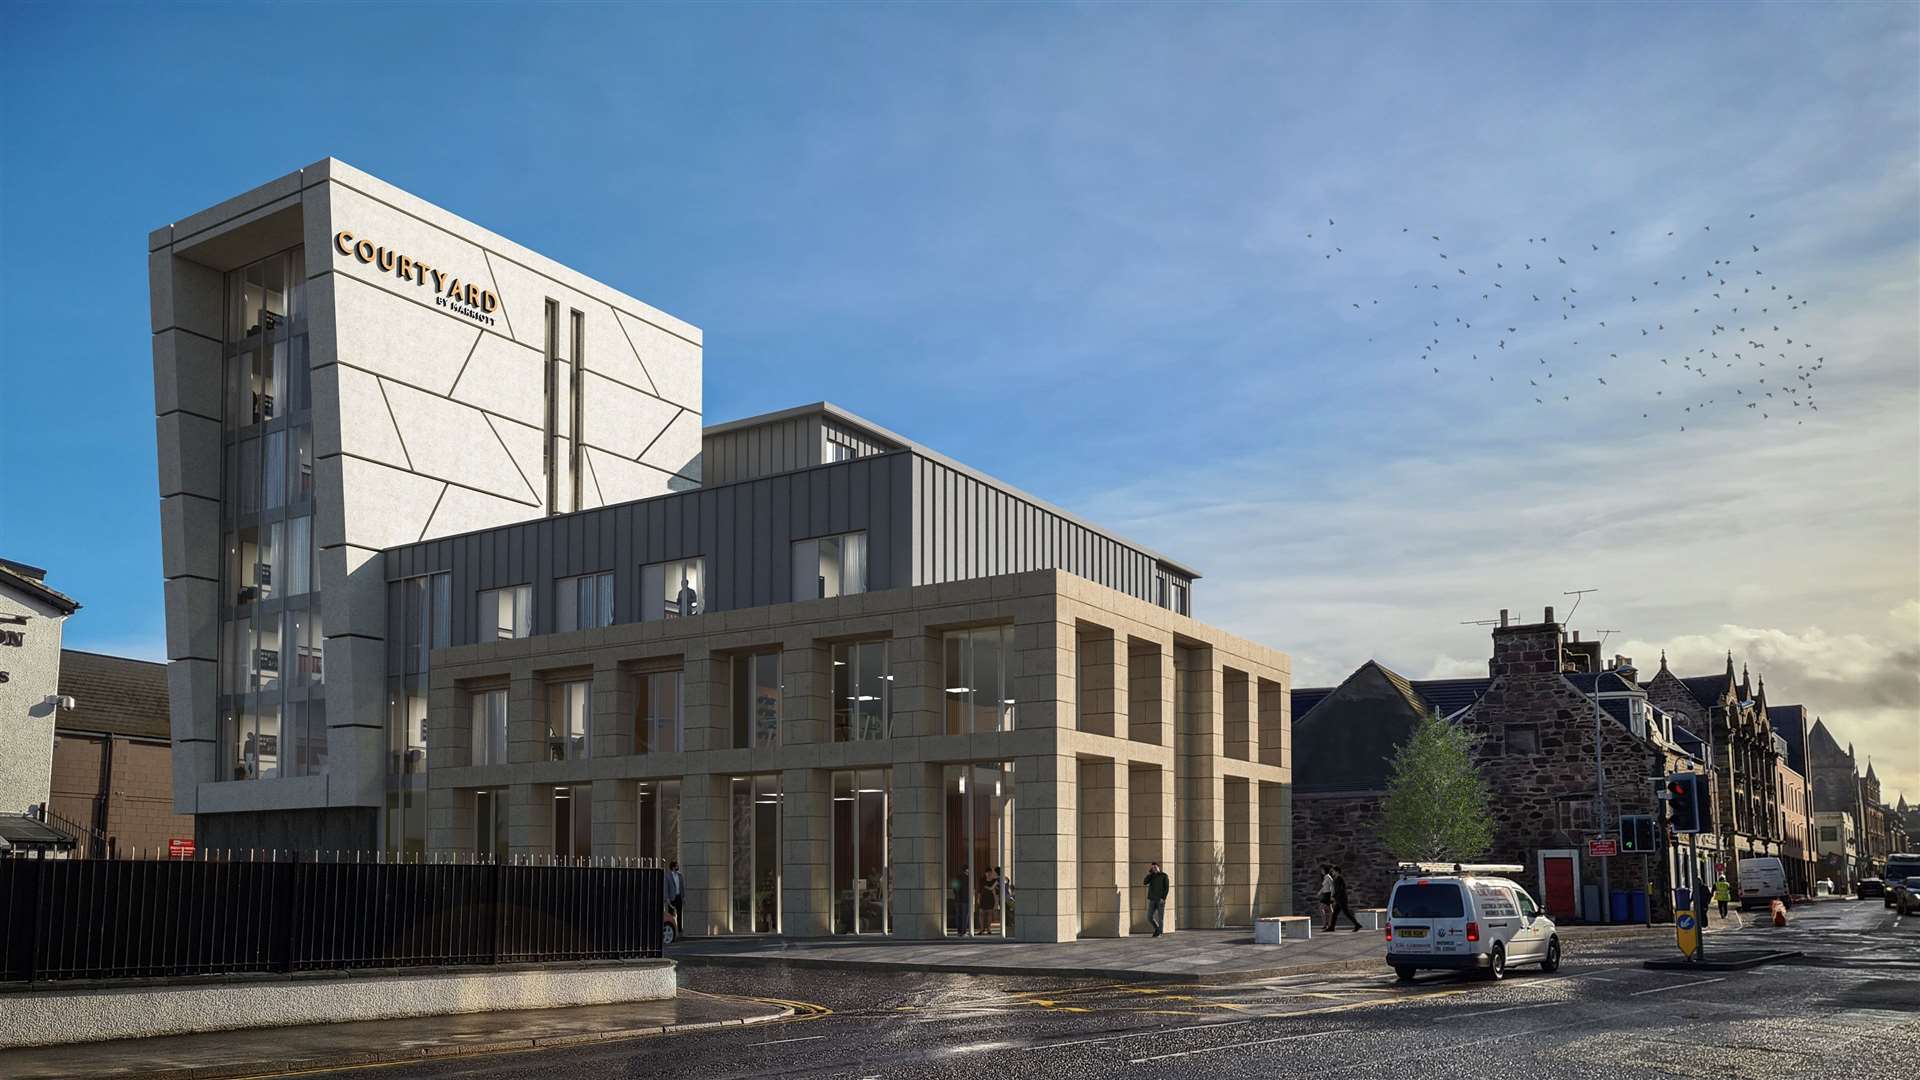 The redrawn proposal for a Courtyard By Marriott hotel at the Ironworks site on Academy Street in Inverness.